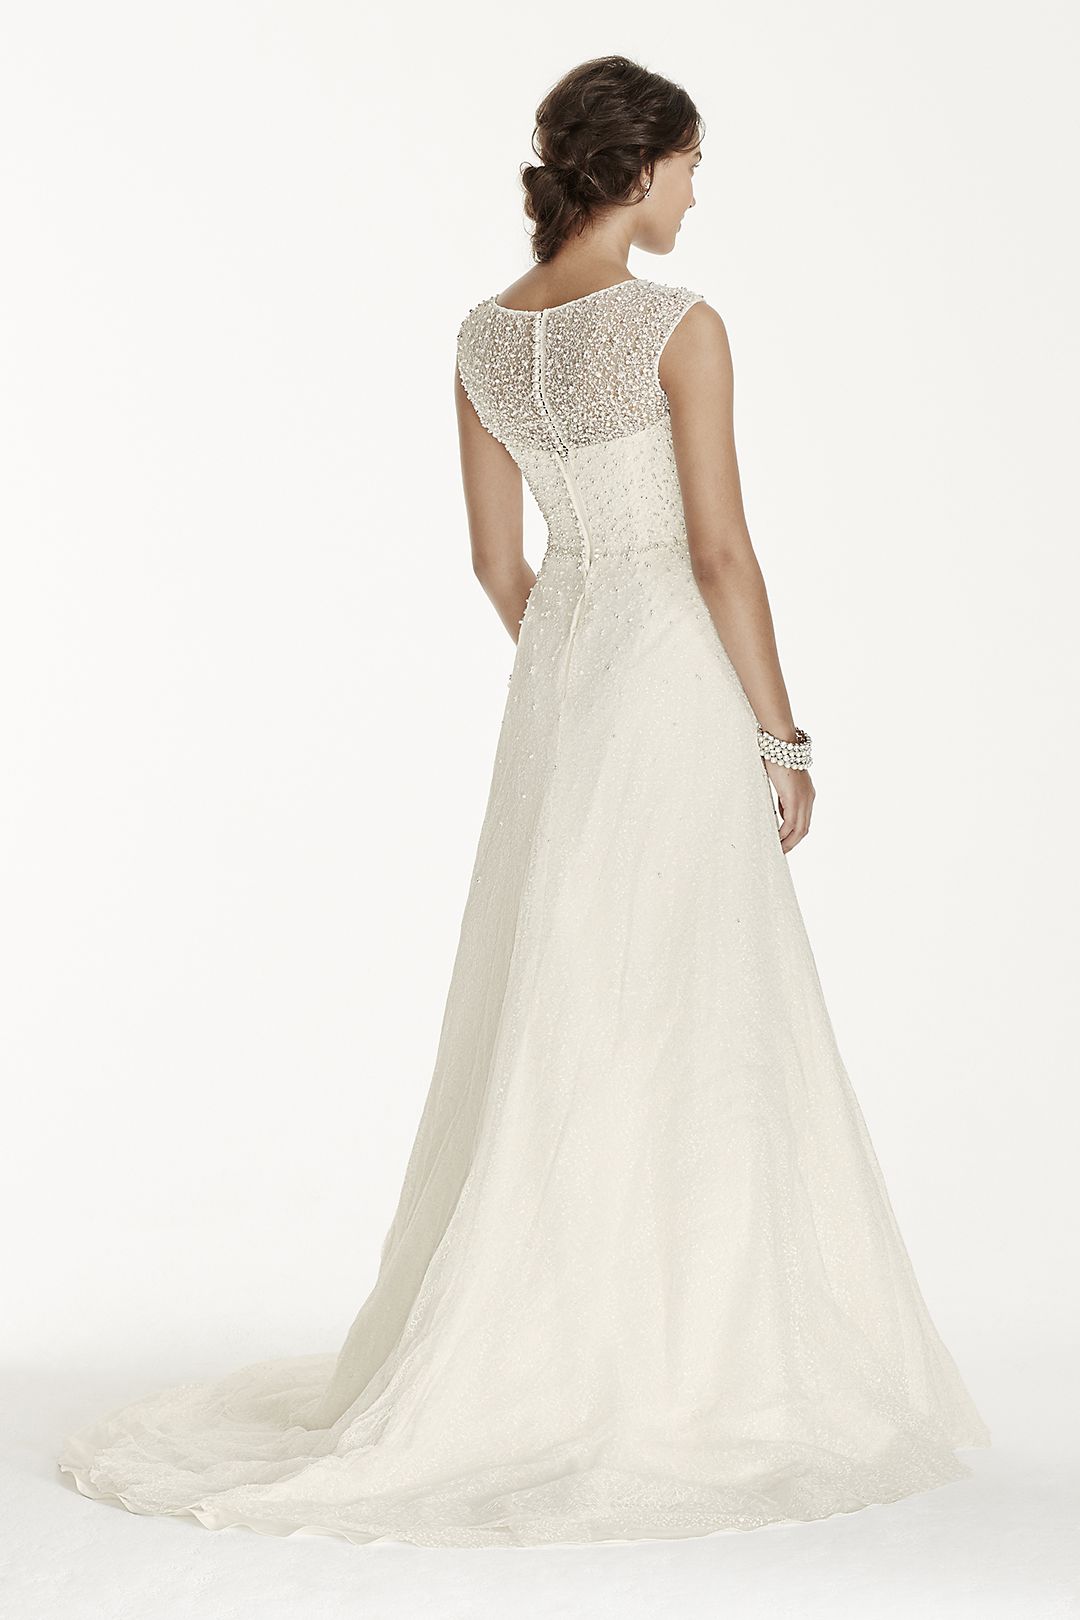 As-Is Cap Sleeve Wedding Dress with Pearl Details Image 4